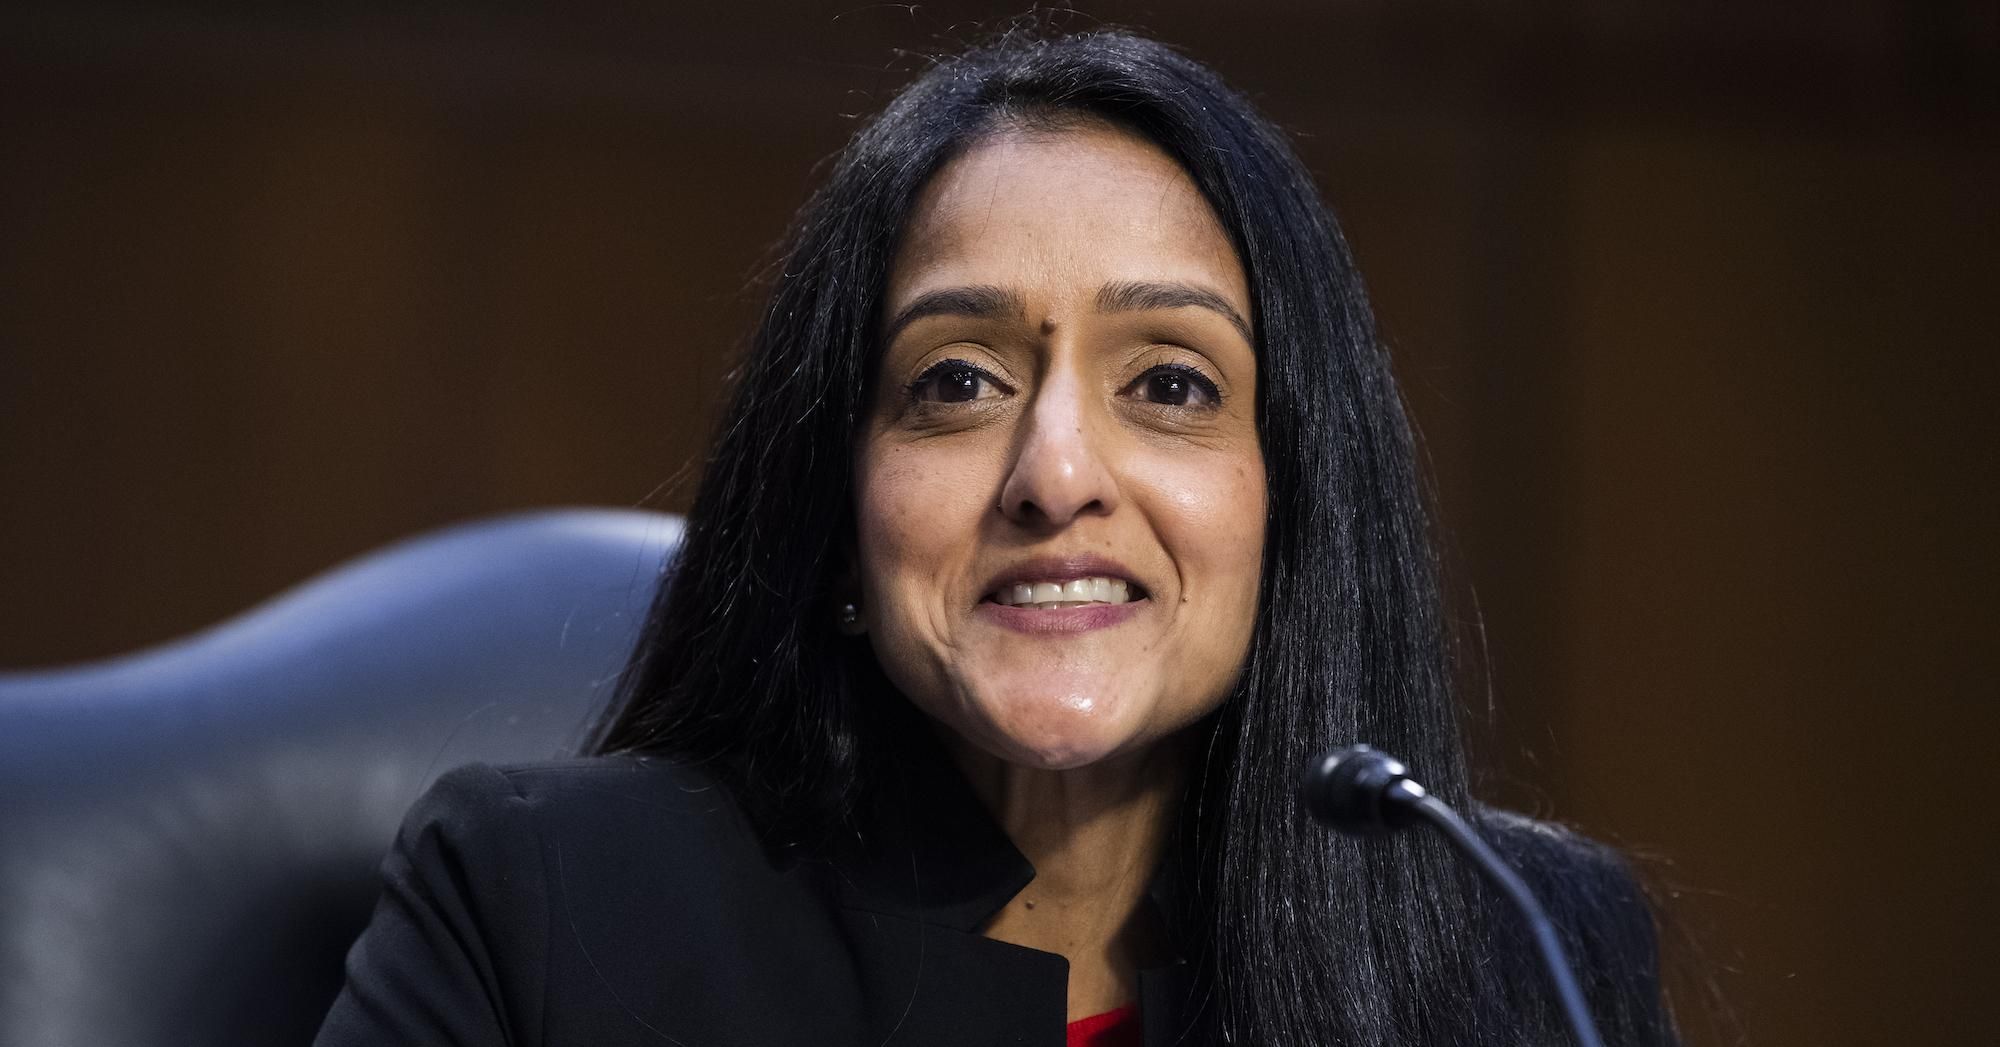 Vanita Gupta, then-nominee for associate attorney general, testifies during her Senate Judiciary Committee confirmation hearing in Hart Building on Tuesday, March 9, 2021.